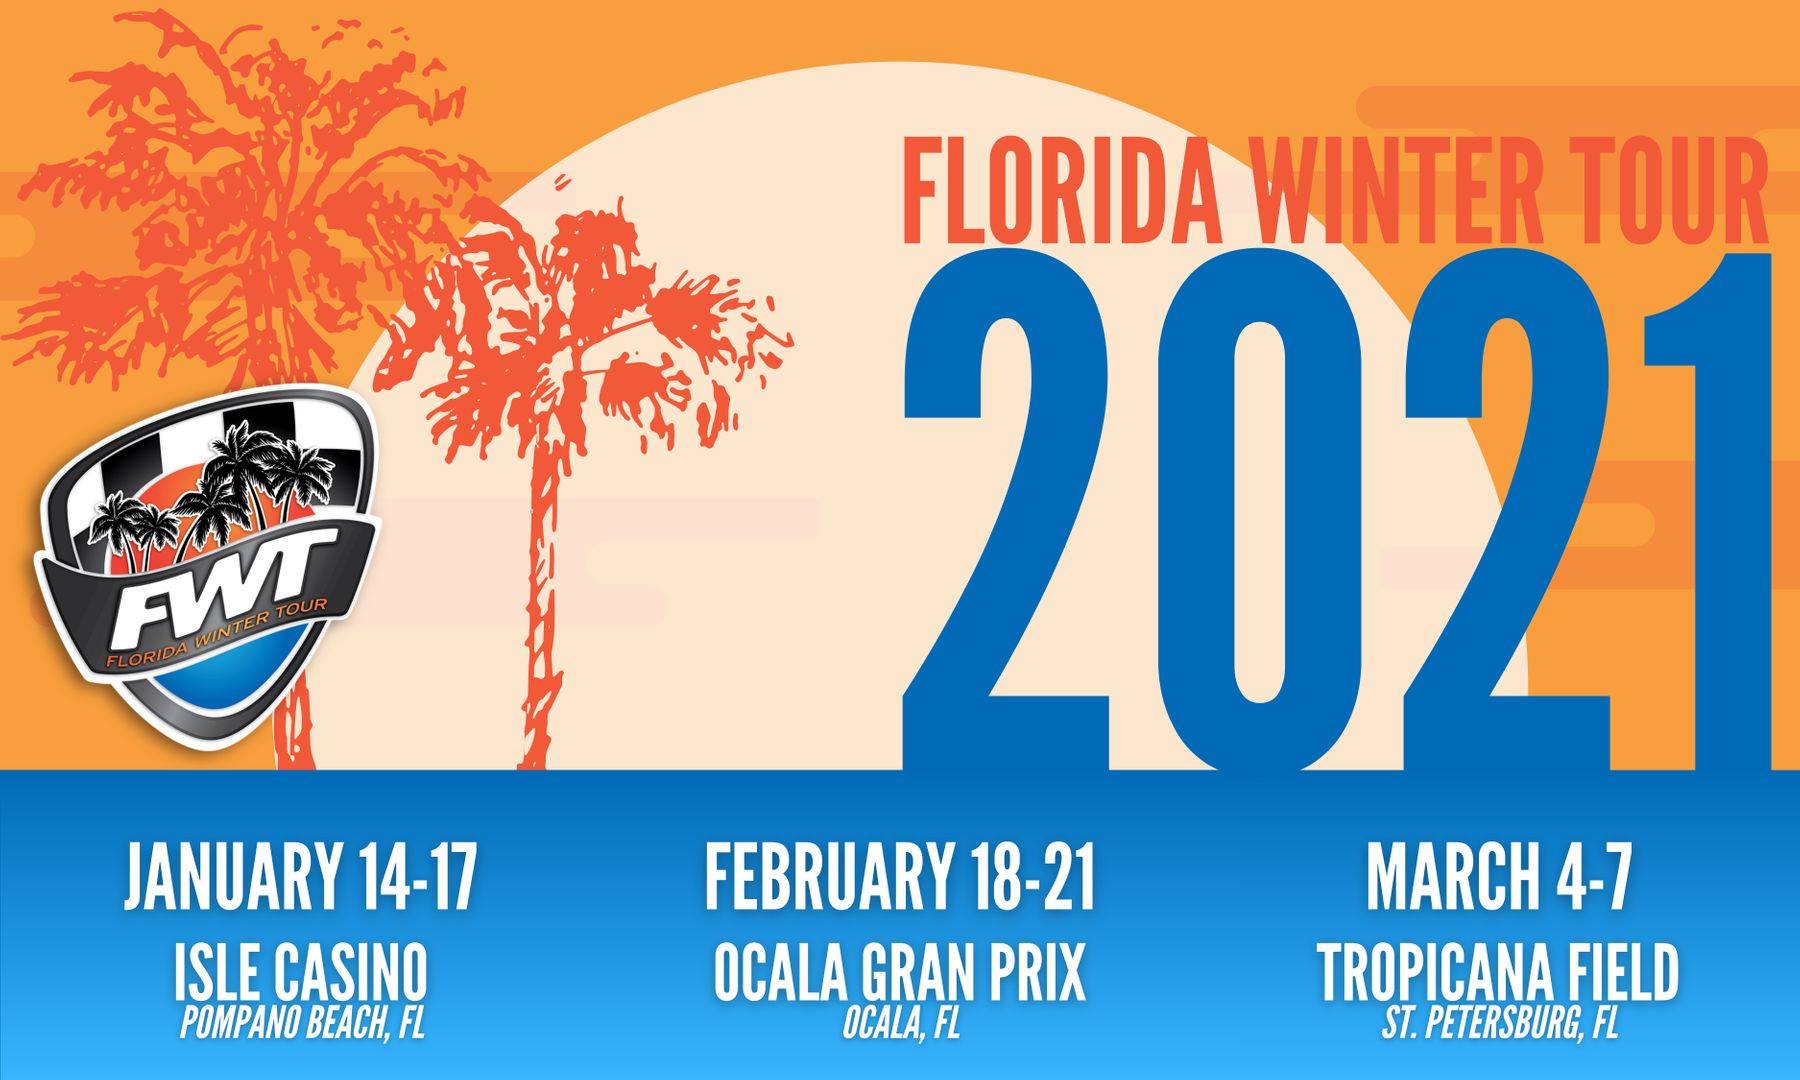 ROK Cup USA Announces Dates and Locations for 2021 Florida Winter Tour ...